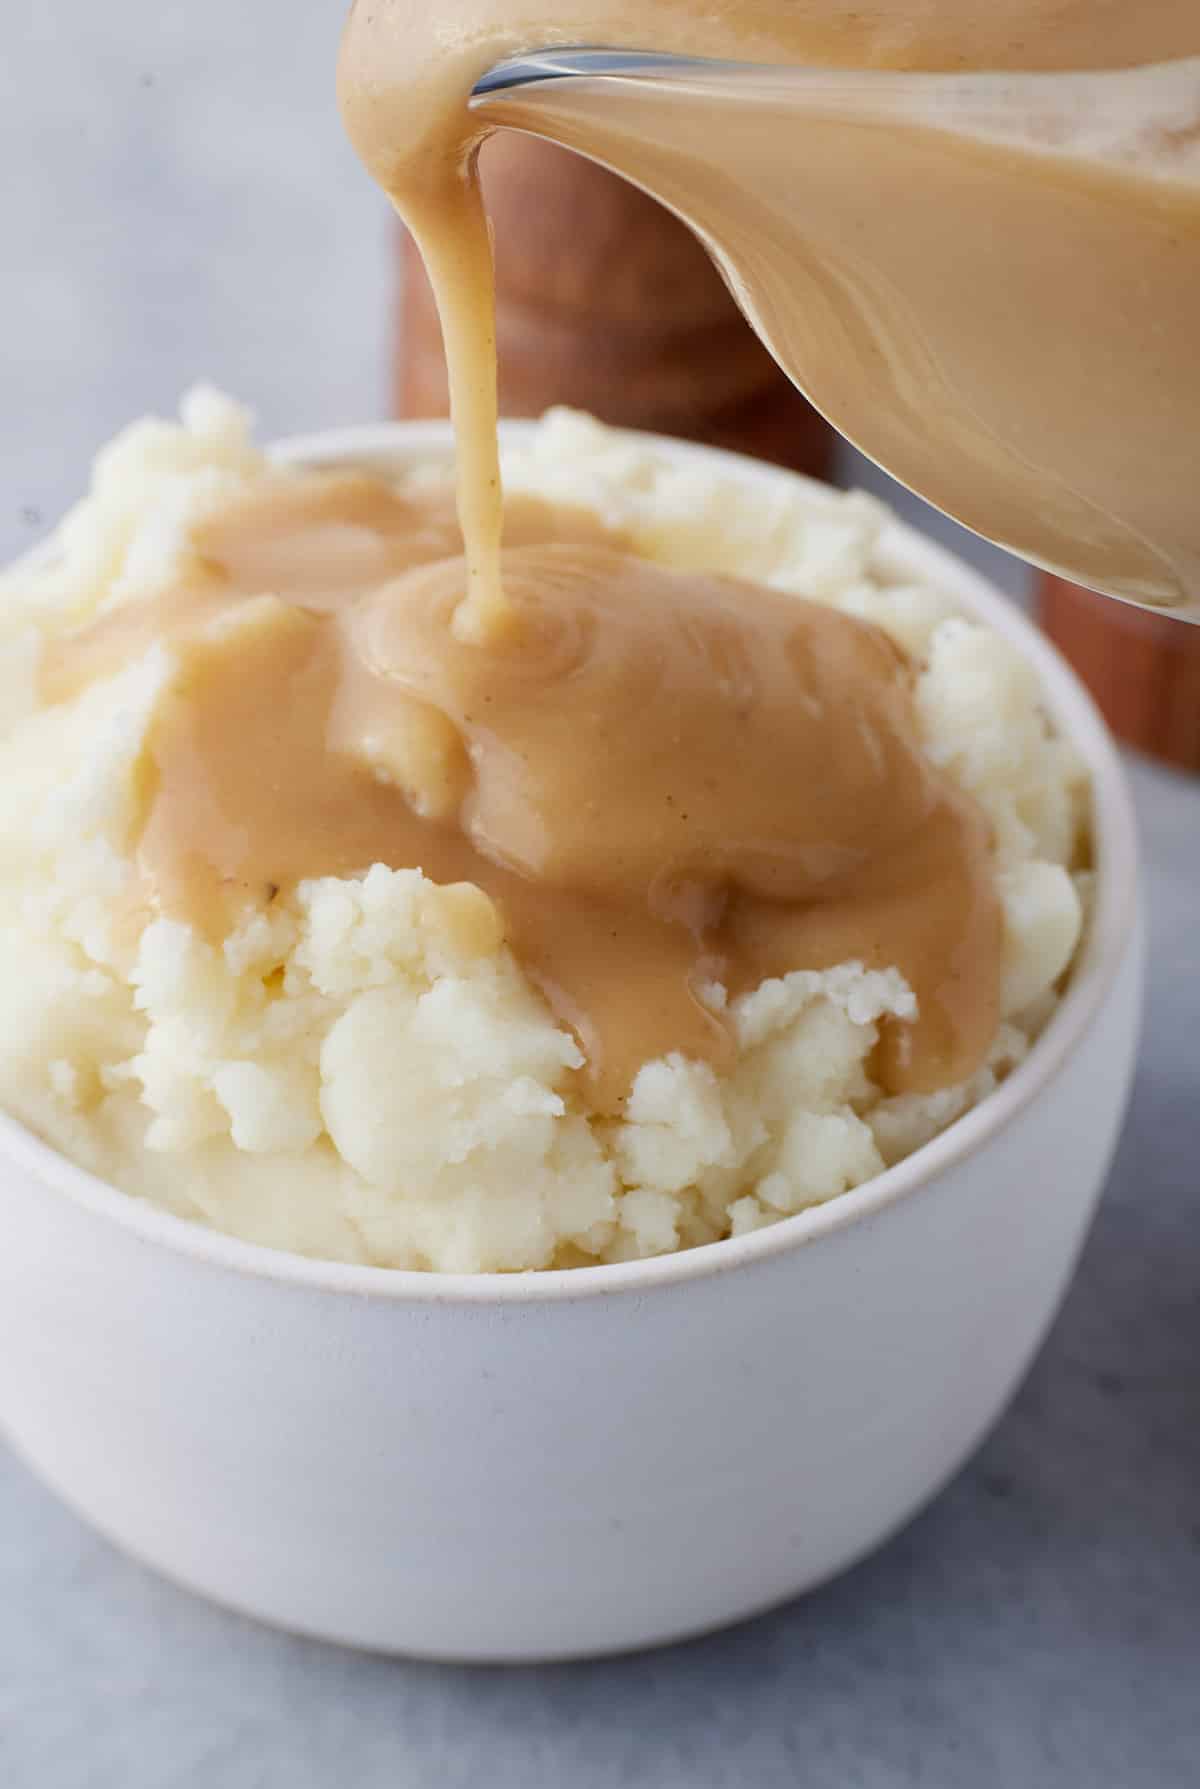 Brown gravy being poured over a bowl of mashed potatoes